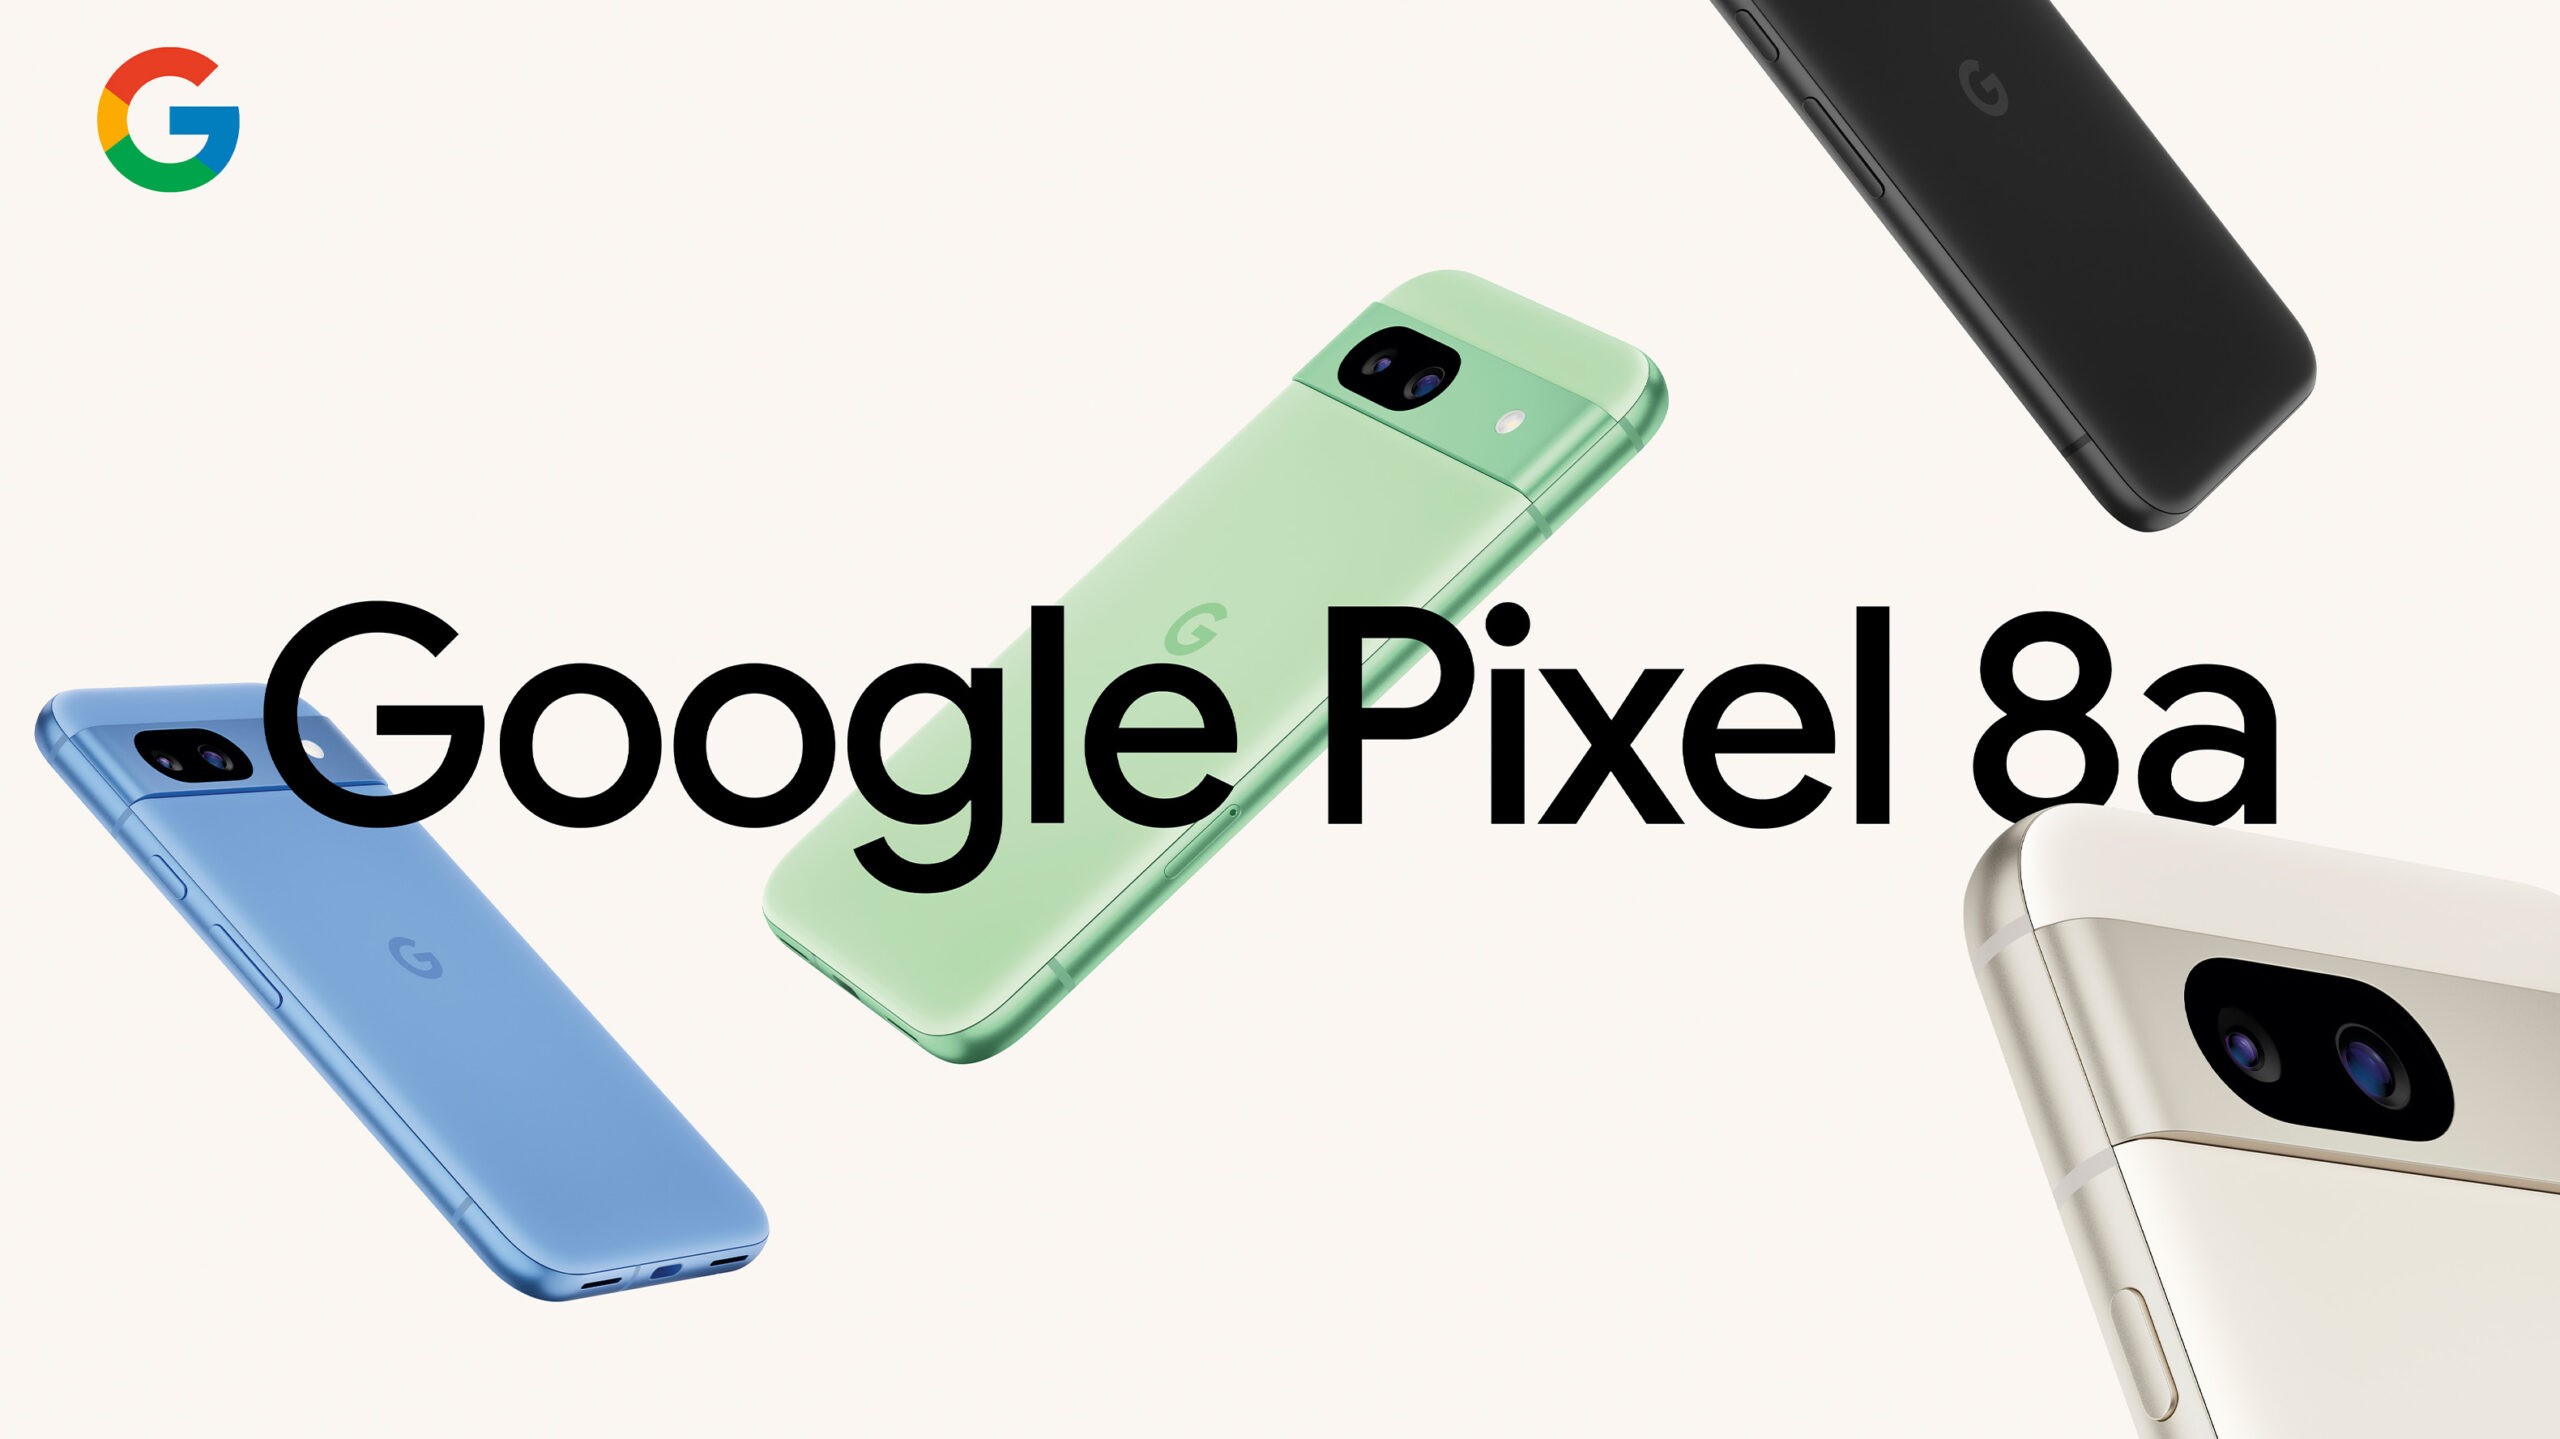 'Google Pixel 8A' unveiled with AI features and software updates for 7 years